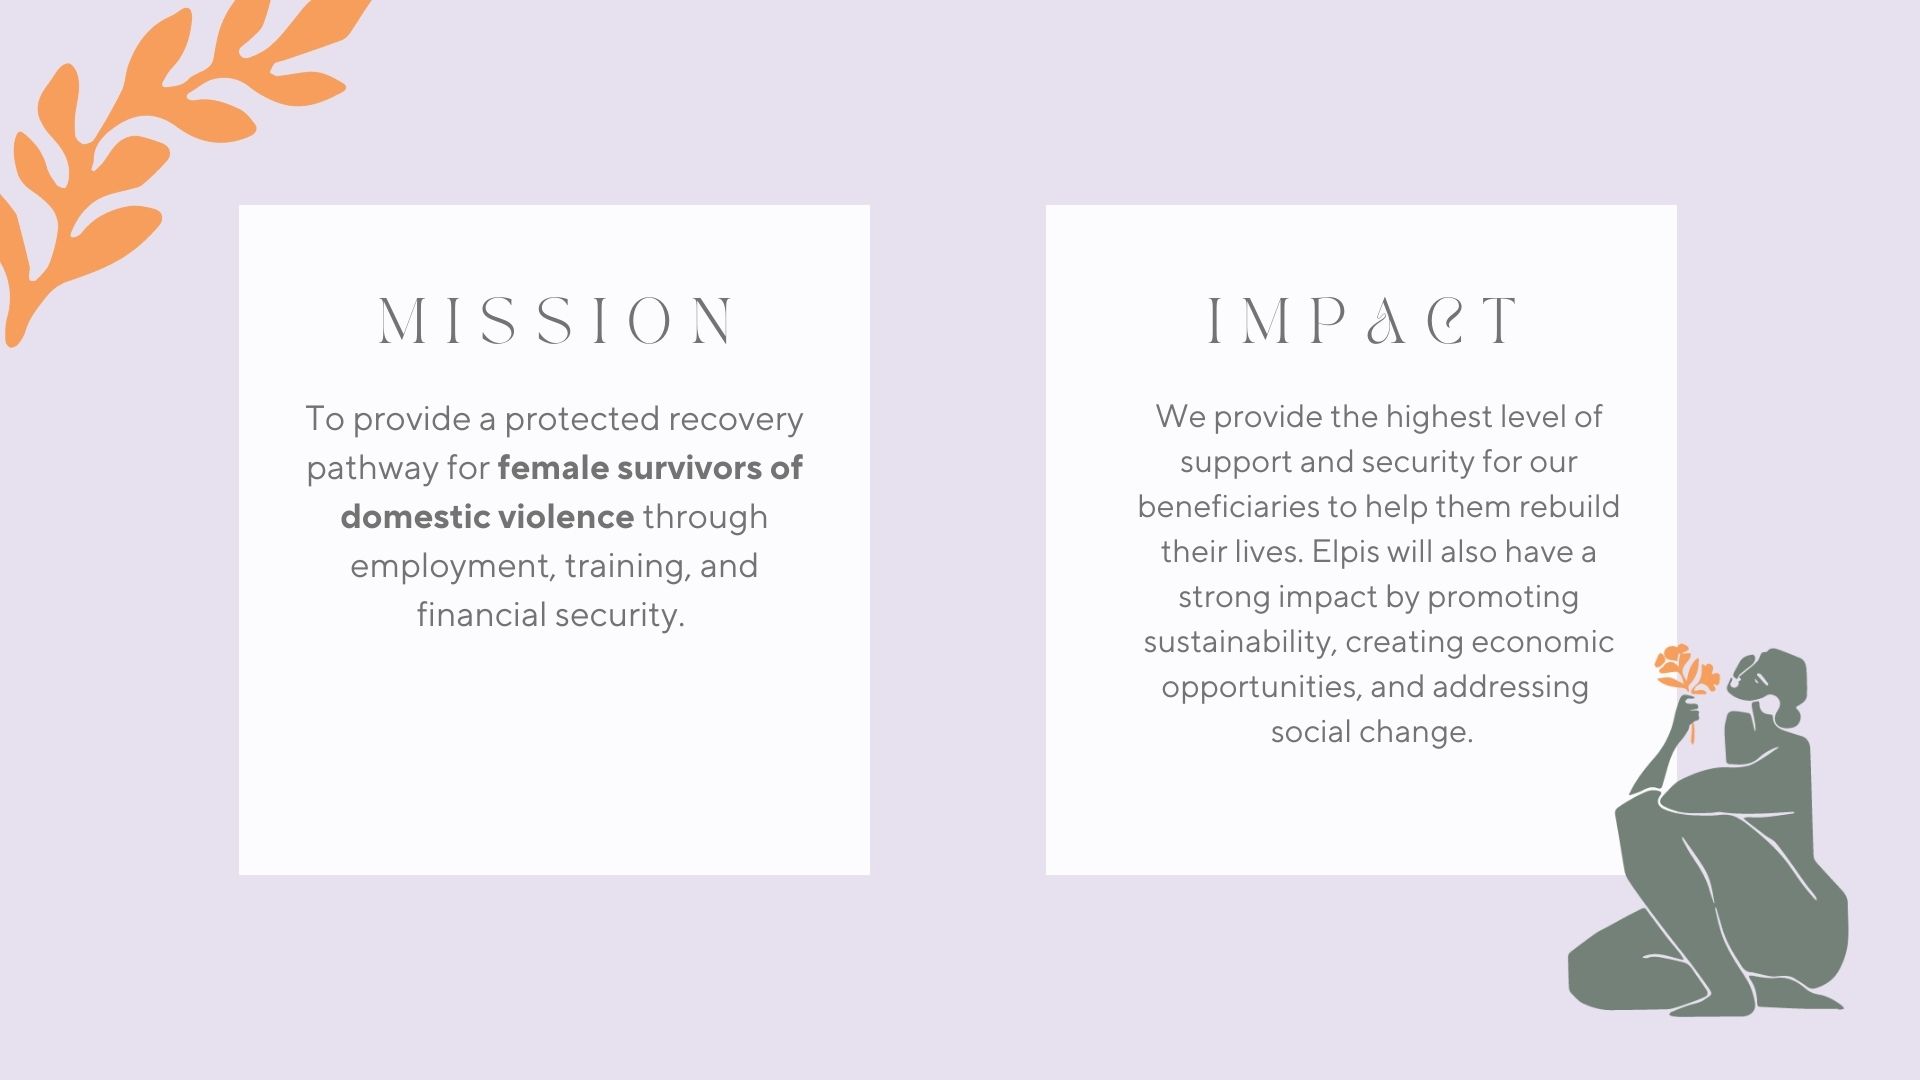 Elpis' mission and impact statement